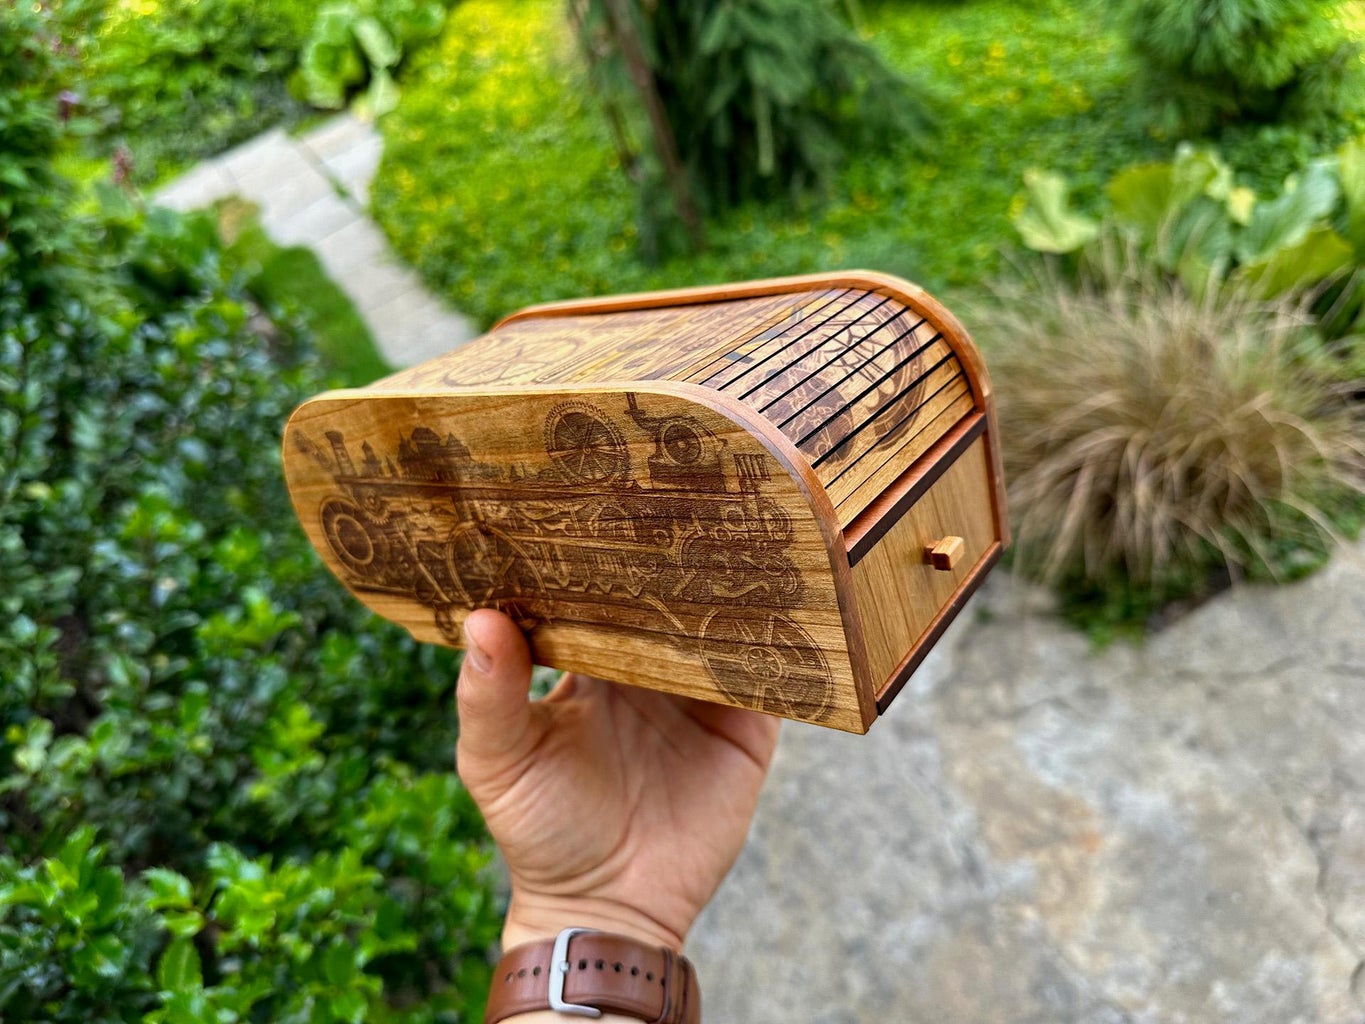 Unusual Wooden Pencil Box With Steampunk Engraving / Tambour